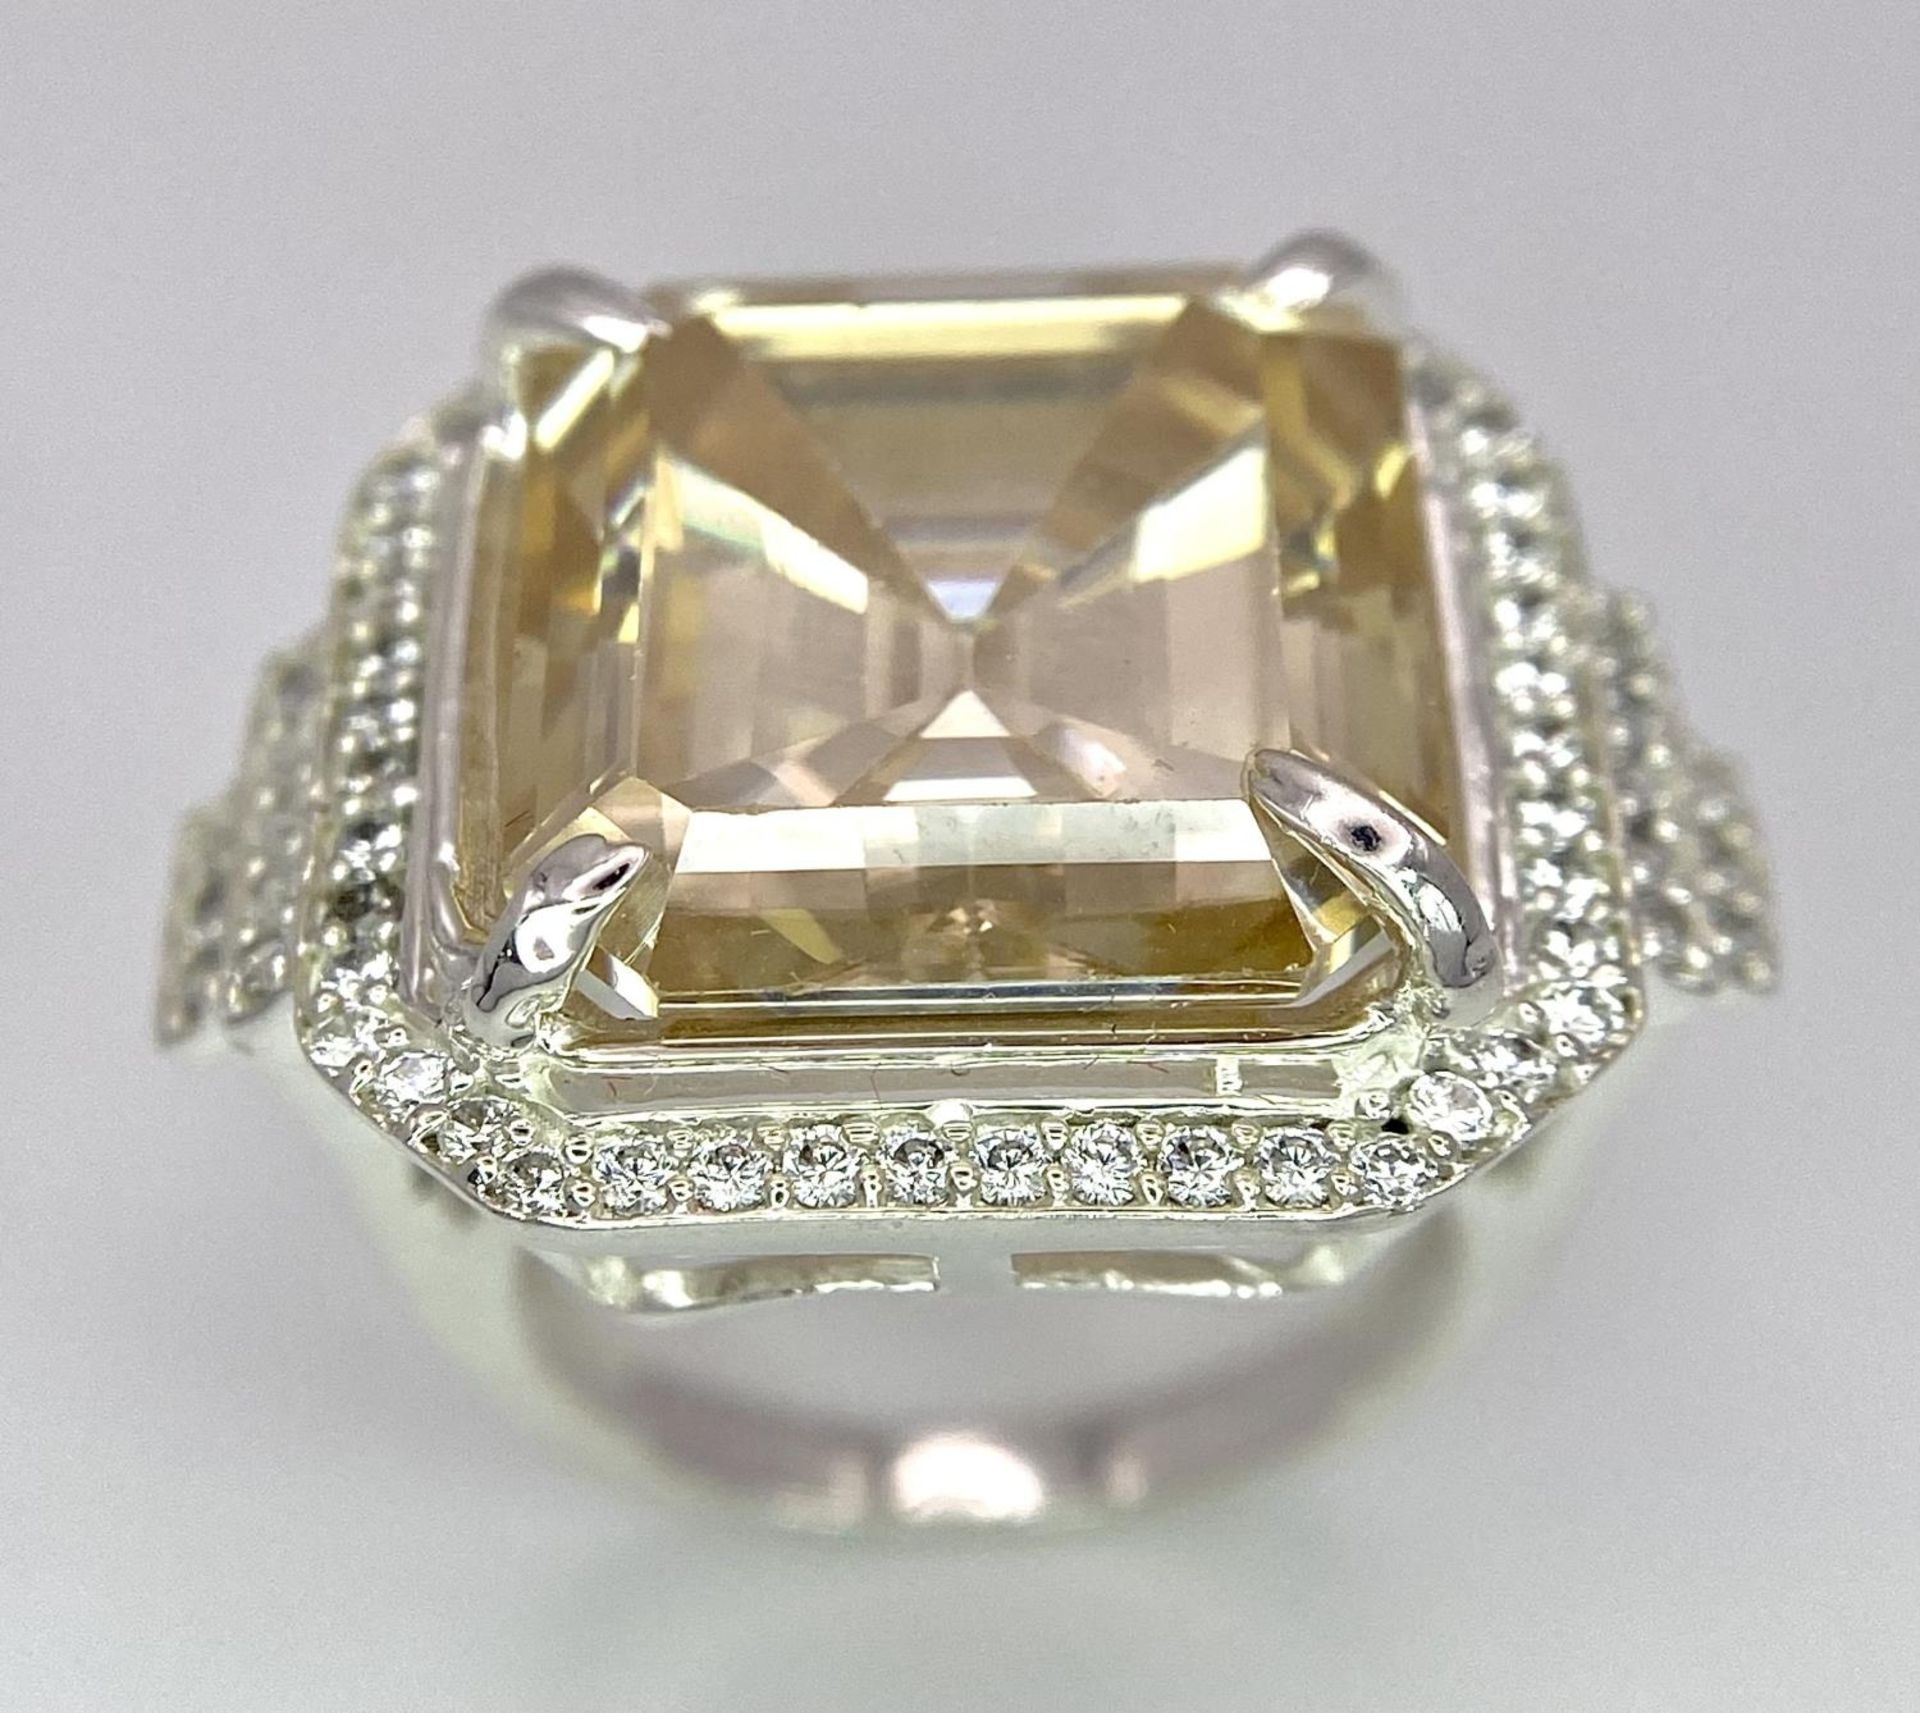 A 16.20ct Champagne Moissanite Dress Ring set in 925 Silver. Comes with a presentation case. Size N. - Image 2 of 7